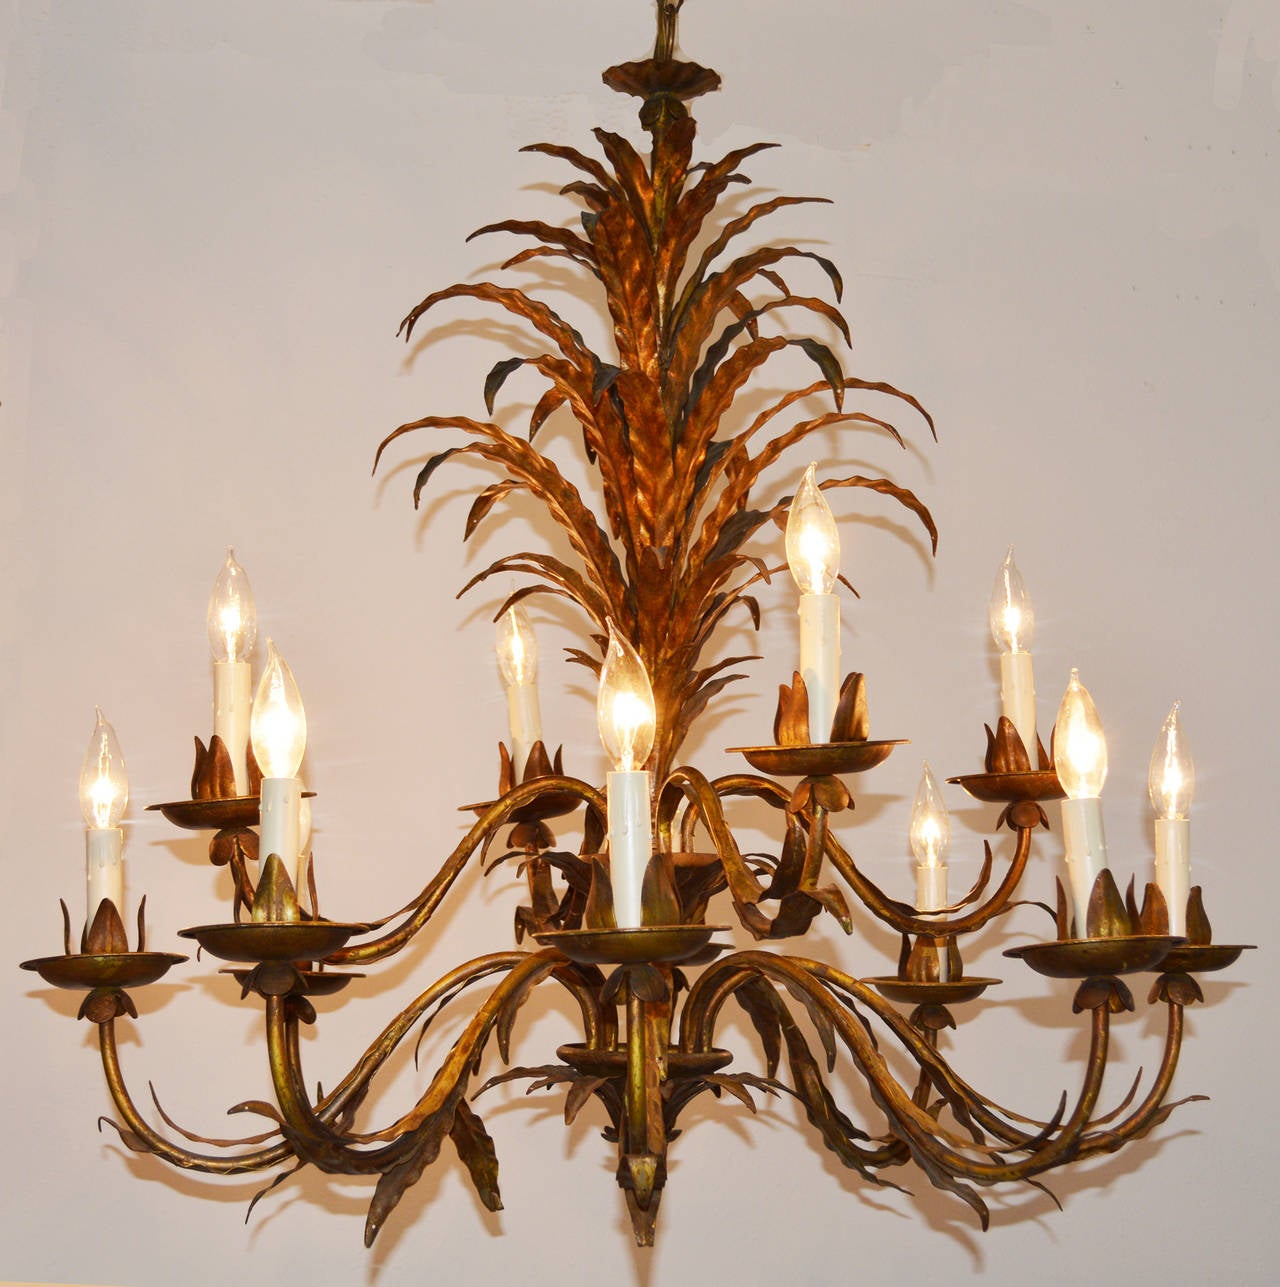 A stunning large twelve-light gilt metal chandelier composed of thin leaves in a palm style. The central support is adorned with out scrolled leaves emanating two tiers of scrolled arms with similar decoration. Rewired and ready to hang. 